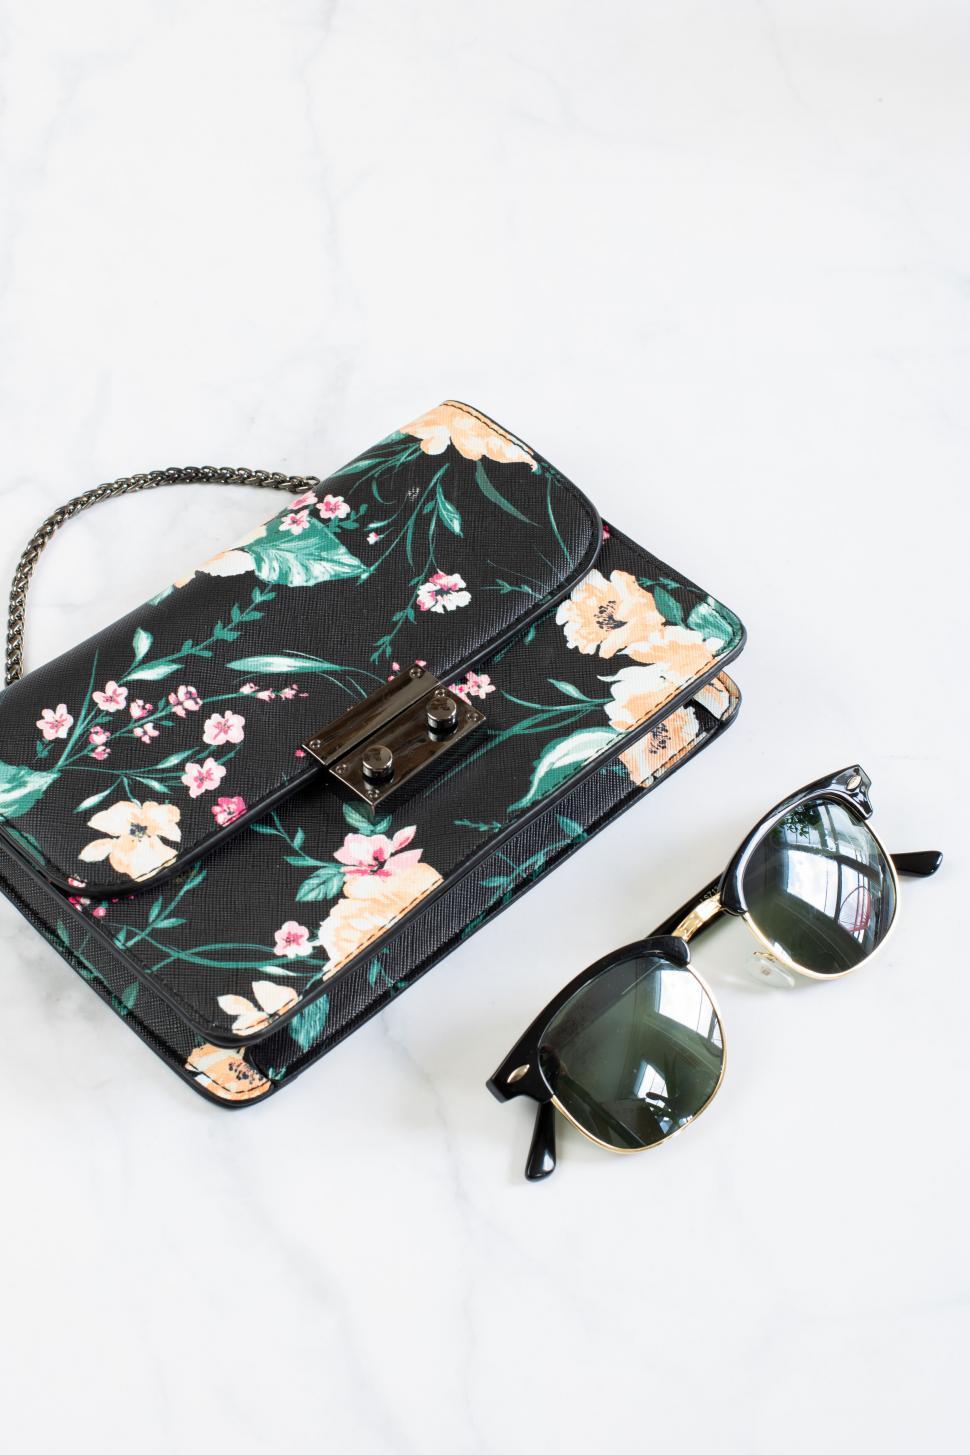 Free Image of Floral purse and sunglasses on marble 